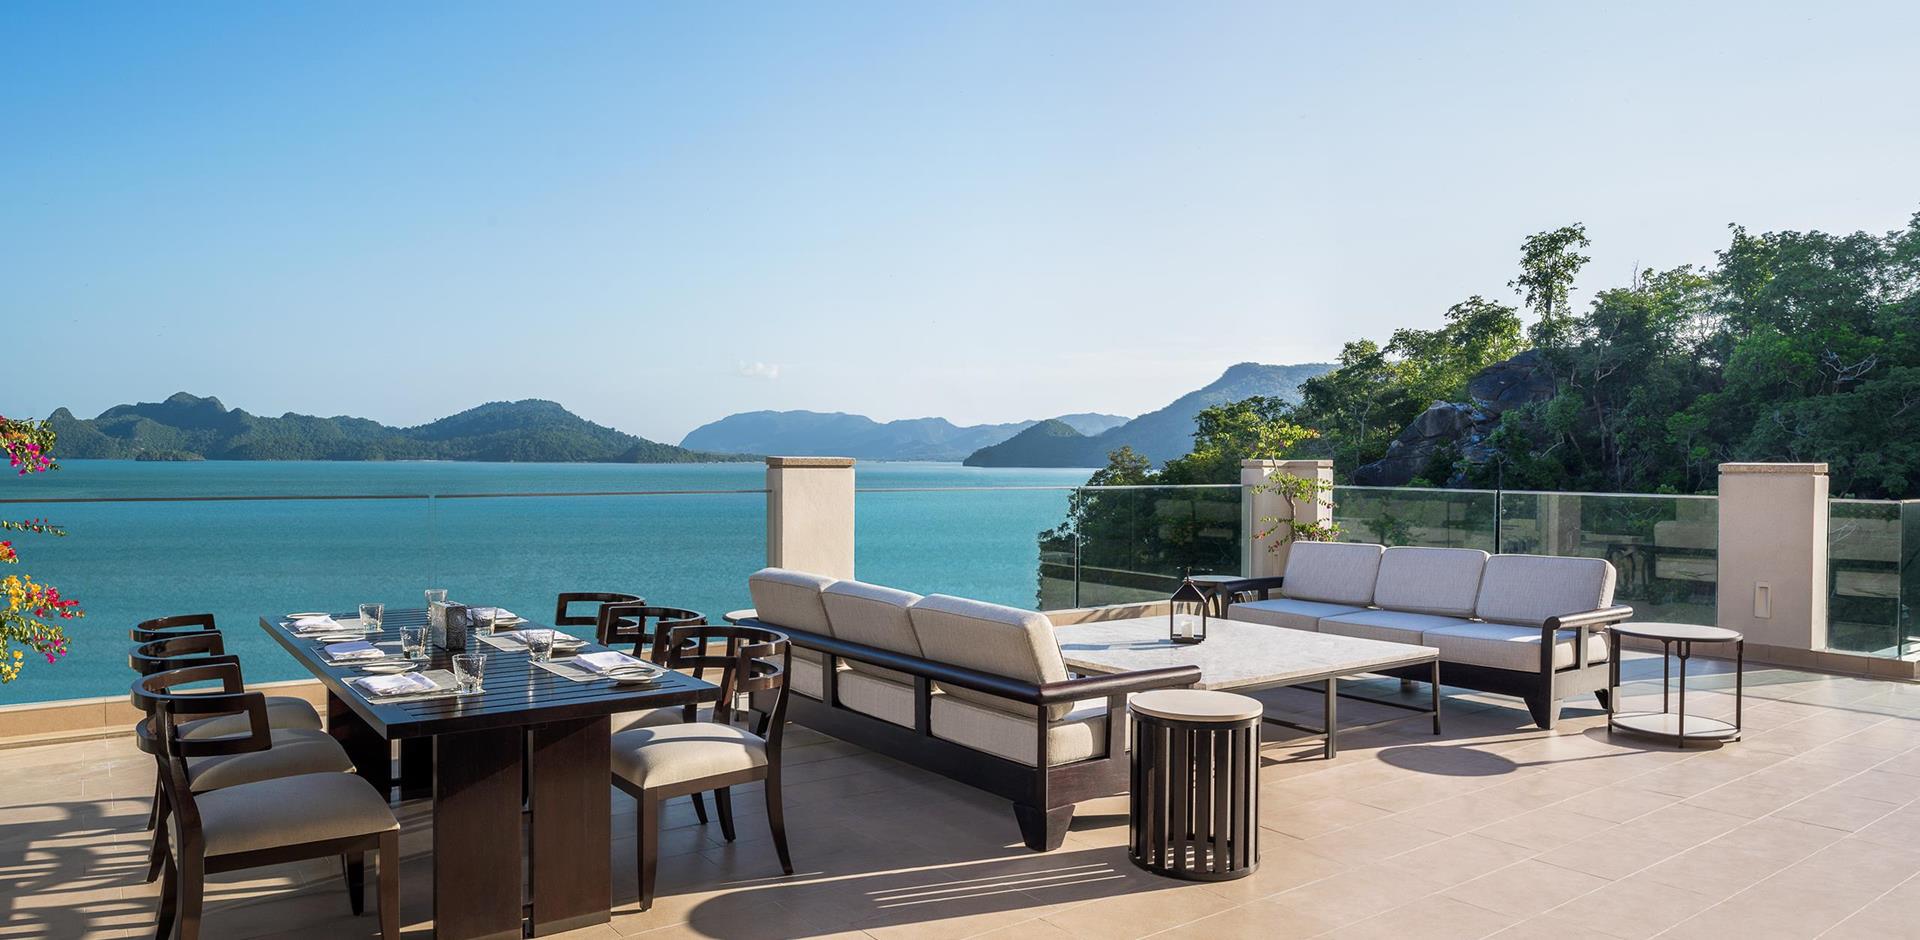 Dining area and lounge, The St. Regis Langkawi, Malaysia